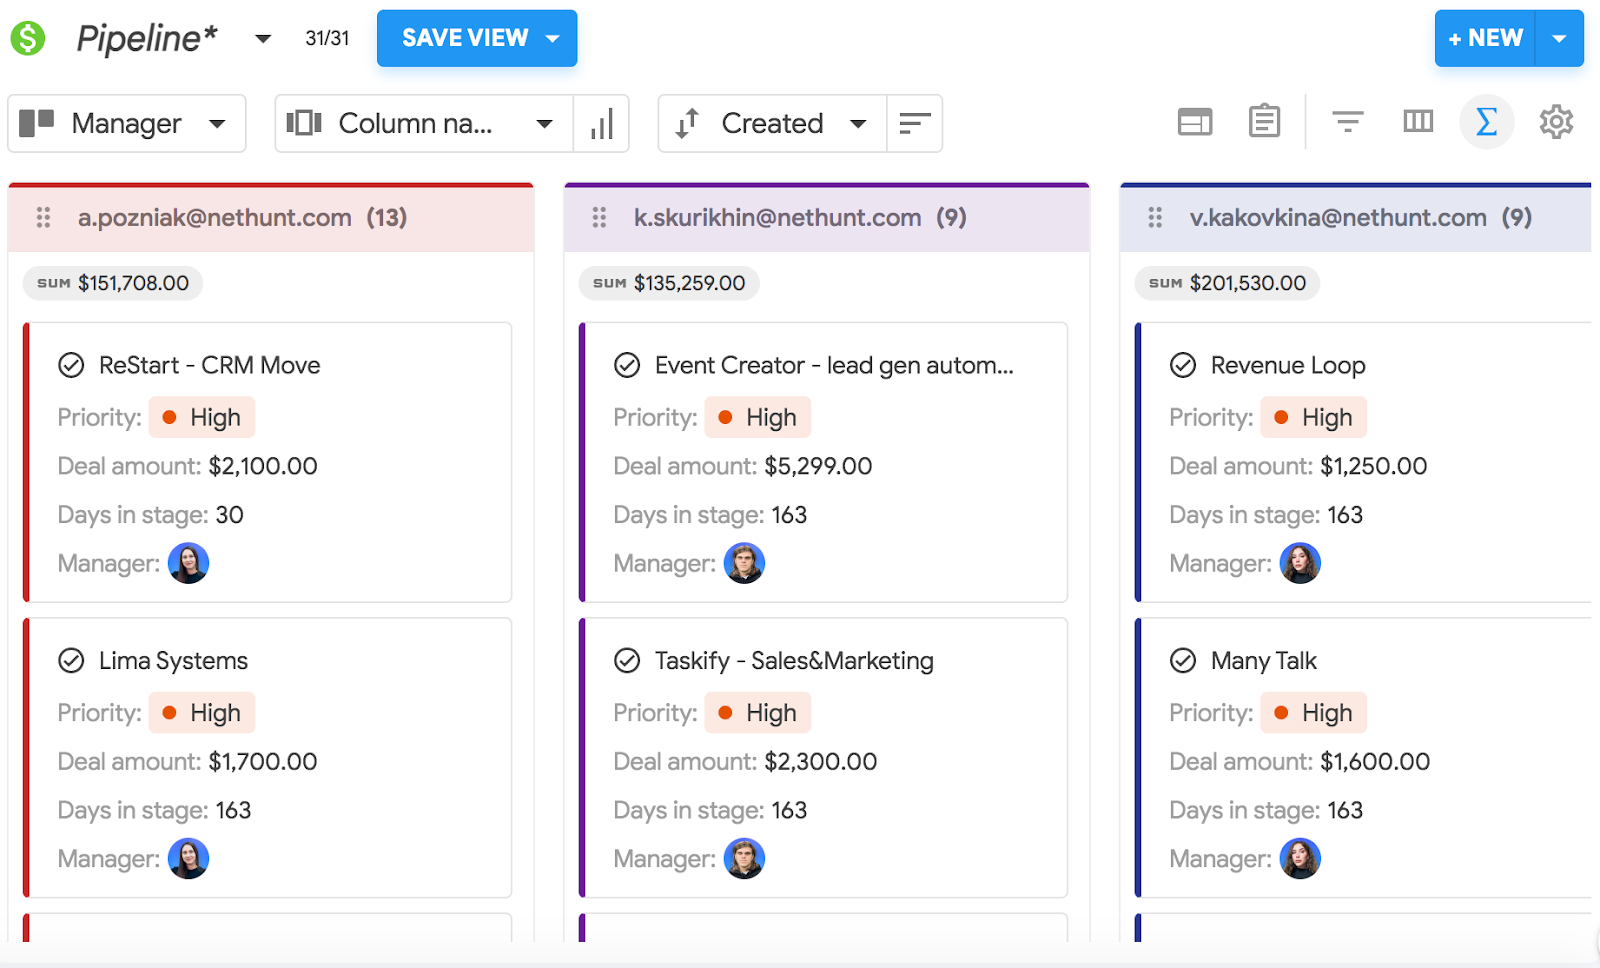 Pipeline by manager view in NetHunt CRM